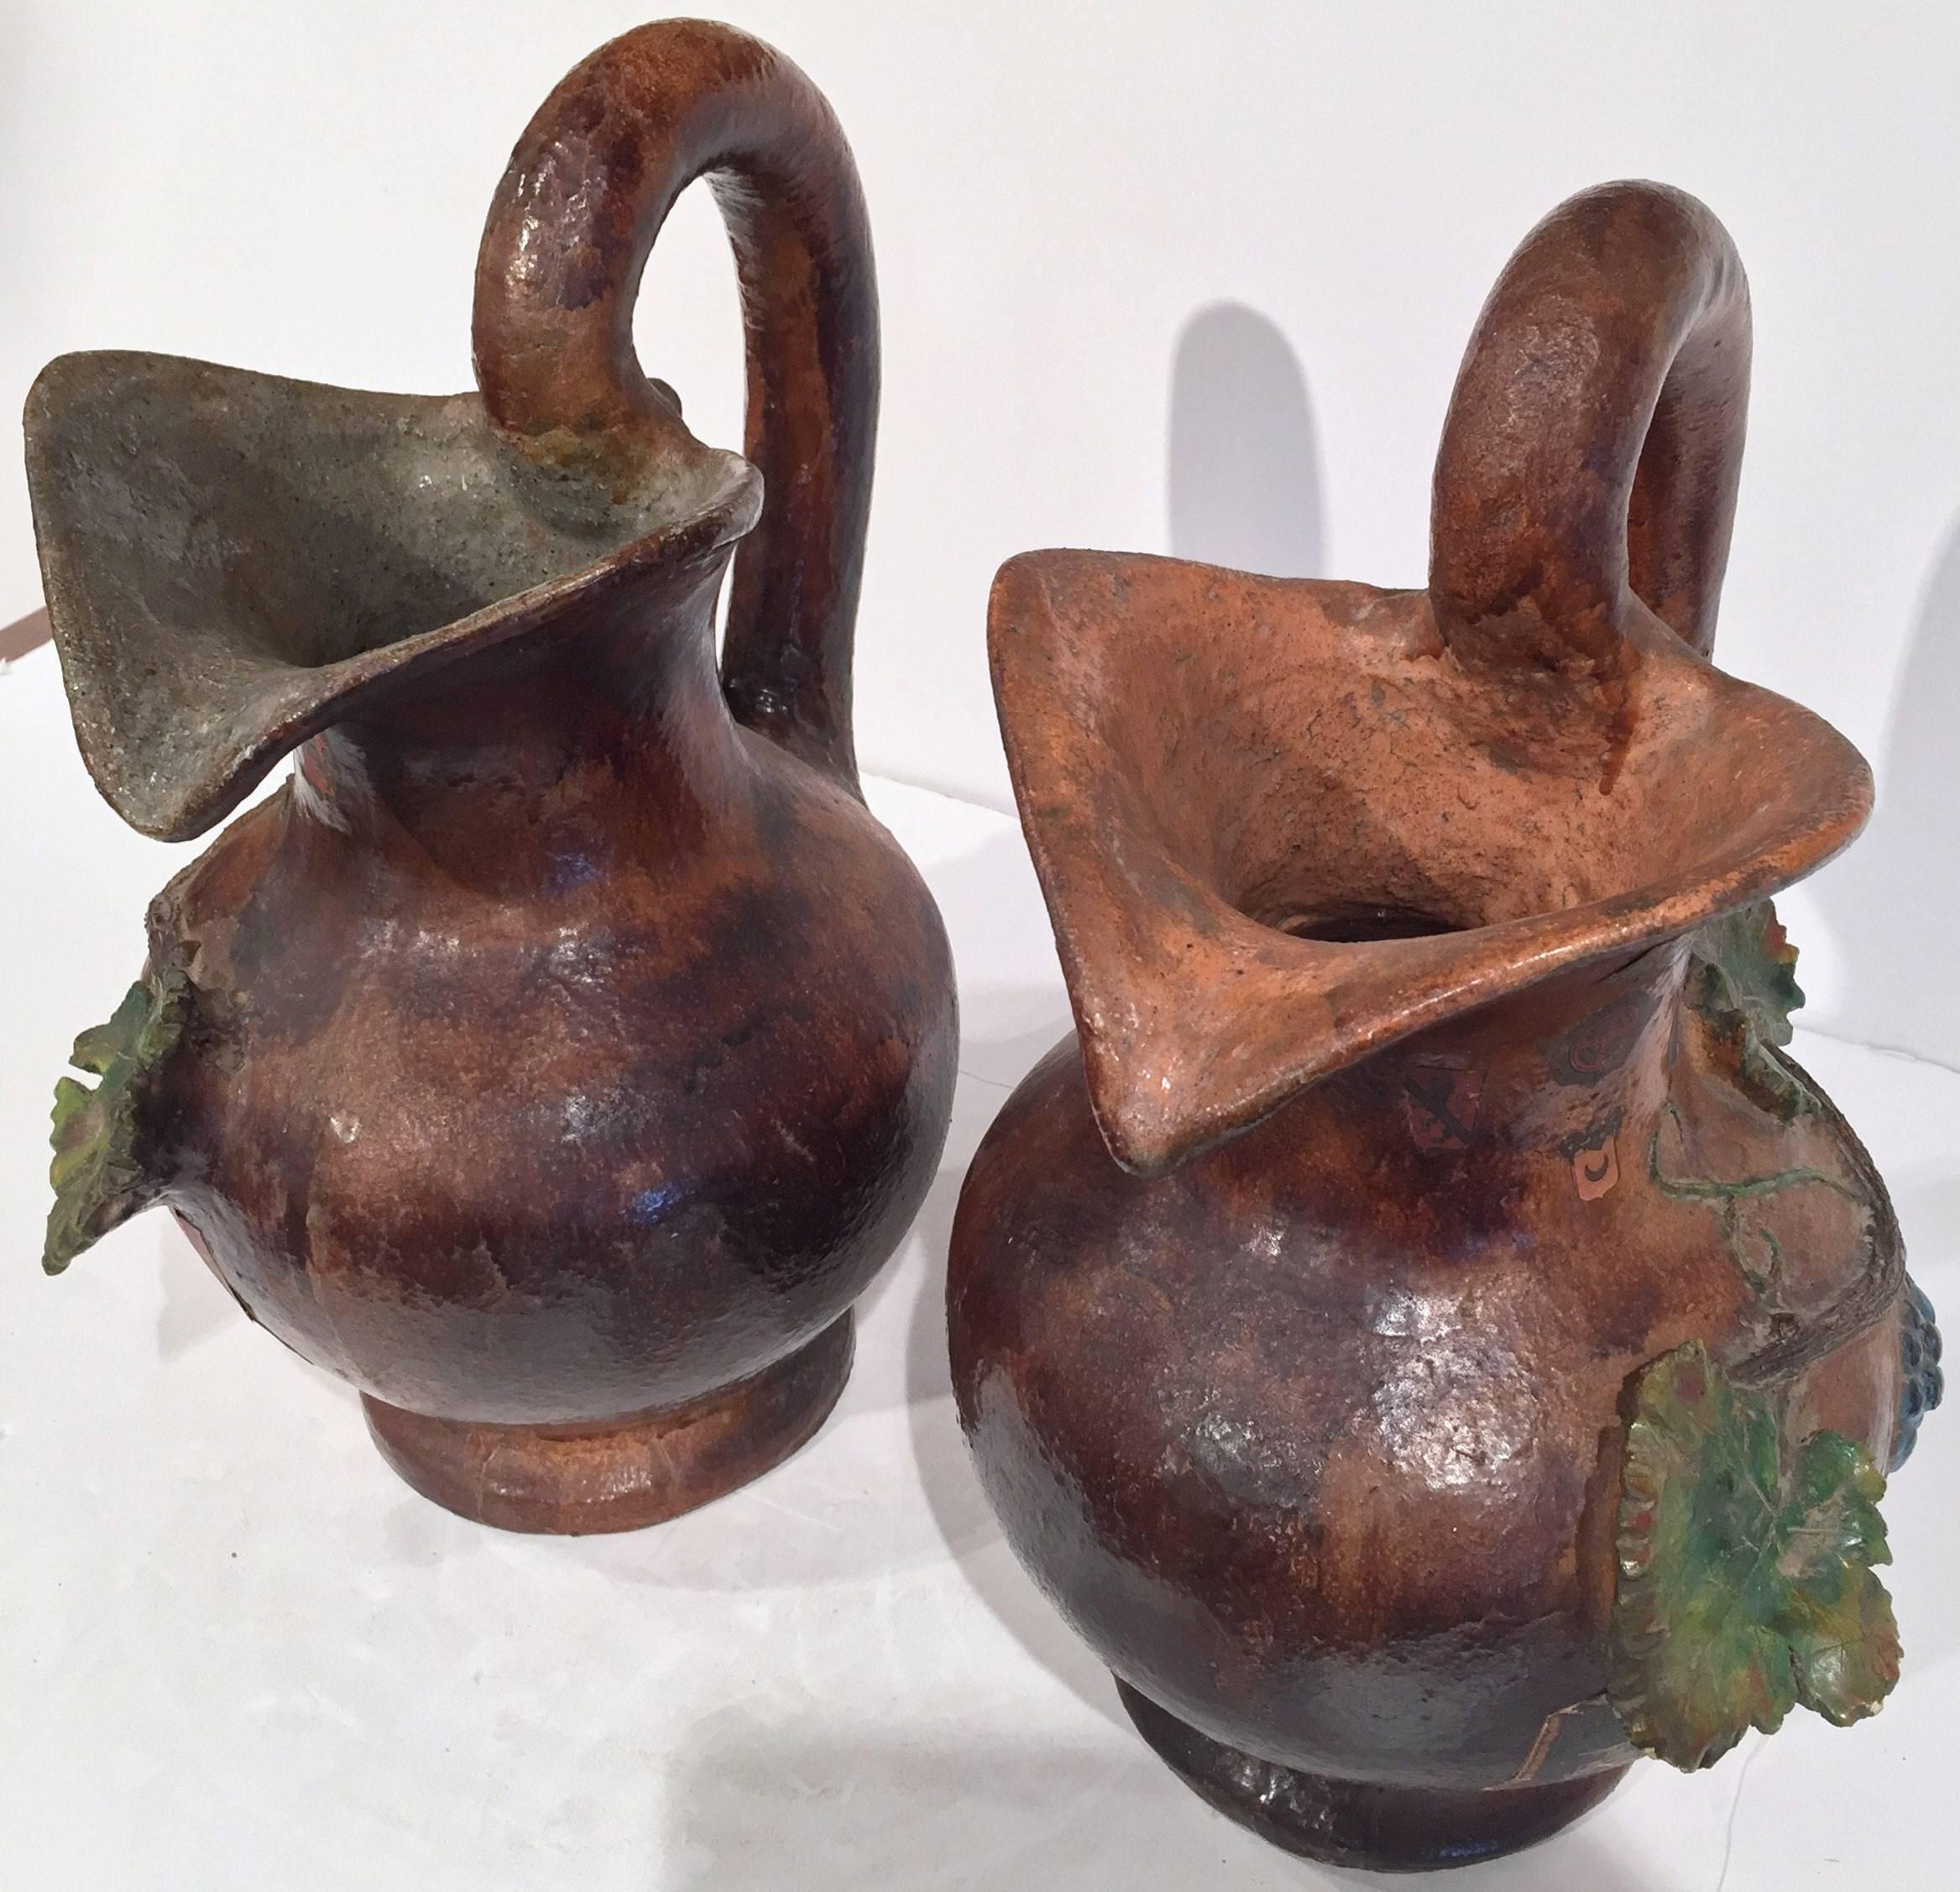 Enhance your wine cellar with this interesting pair of antique medieval terracotta wine pitchers from Bordeaux, France, circa 1860; the jugs made in clay, feature a large handle with a curved beak, and colorful relief grapes and vine leaves. Each